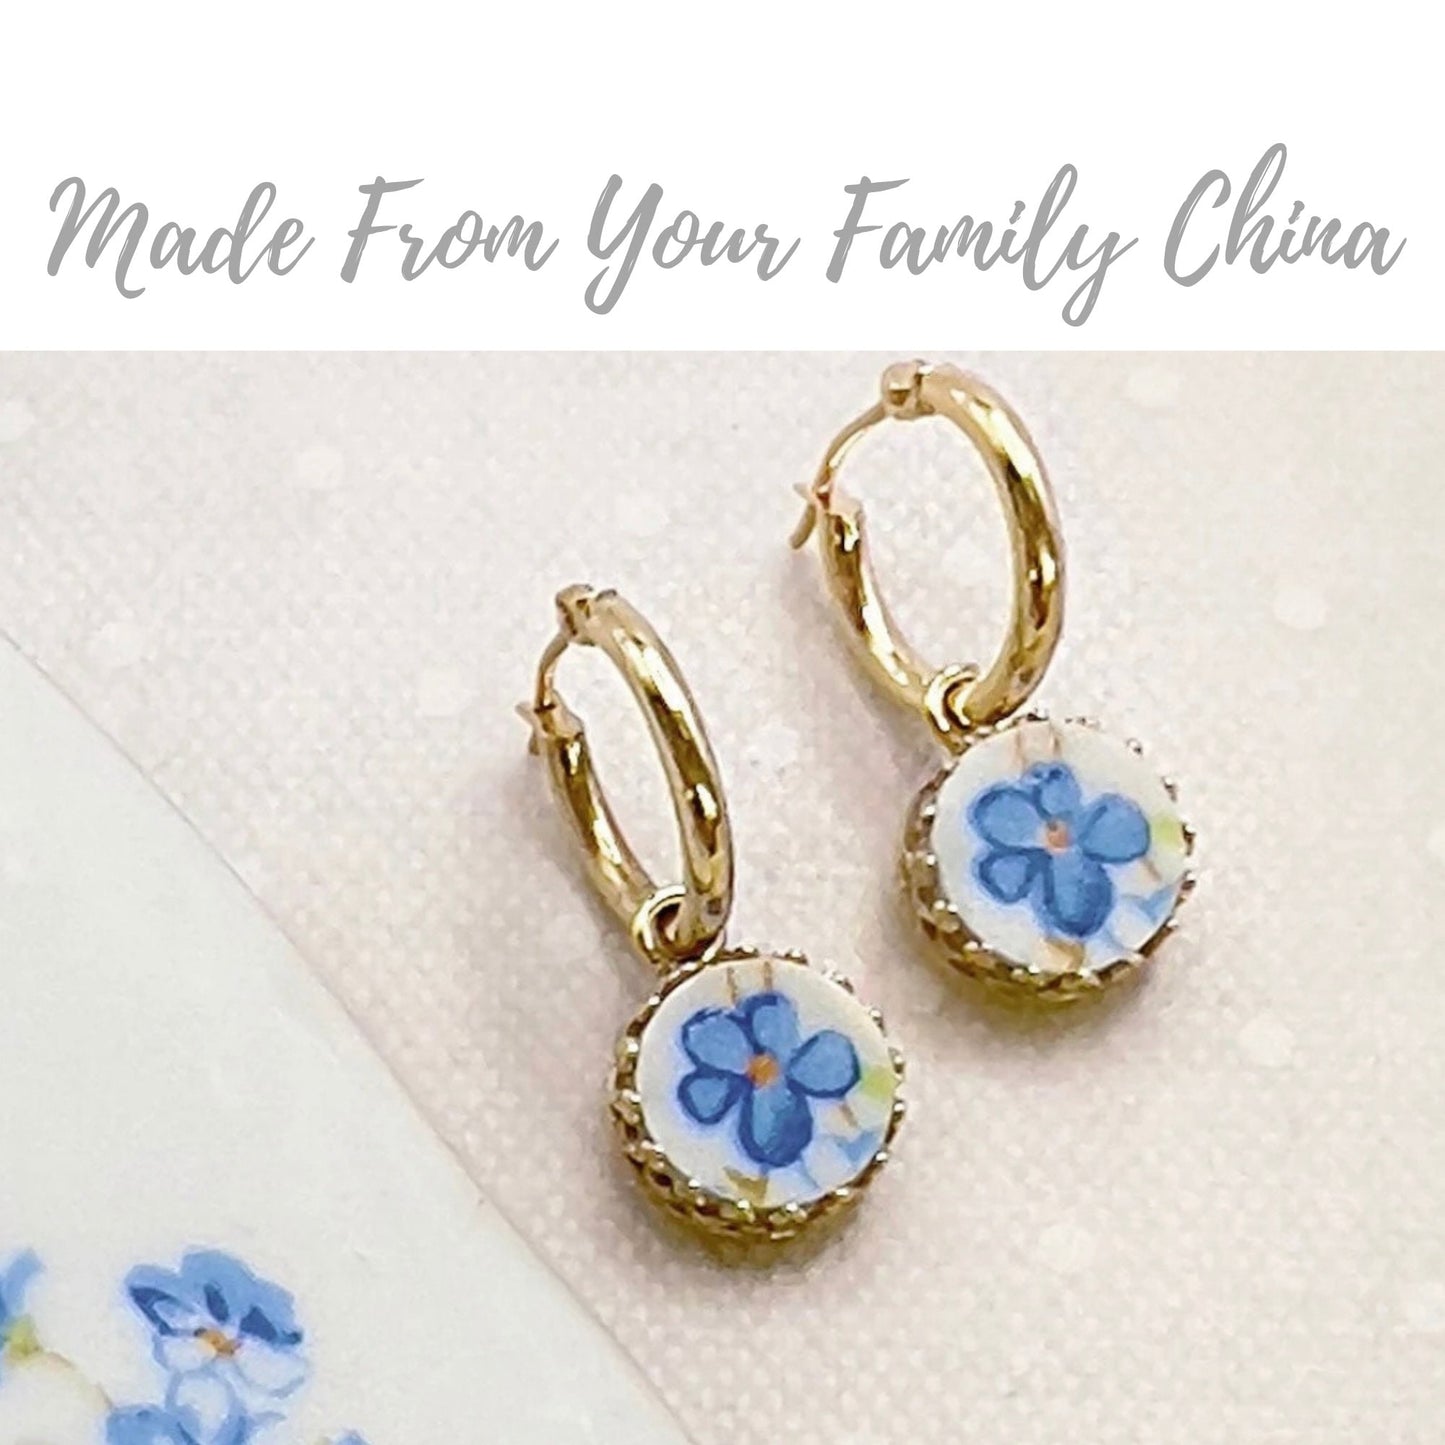 CUSTOM ORDER Dainty 14k Gold Hoop Earrings, Unique 20th Anniversary Gift for Wife, Custom Broken China Jewelry, Made From Your Wedding China